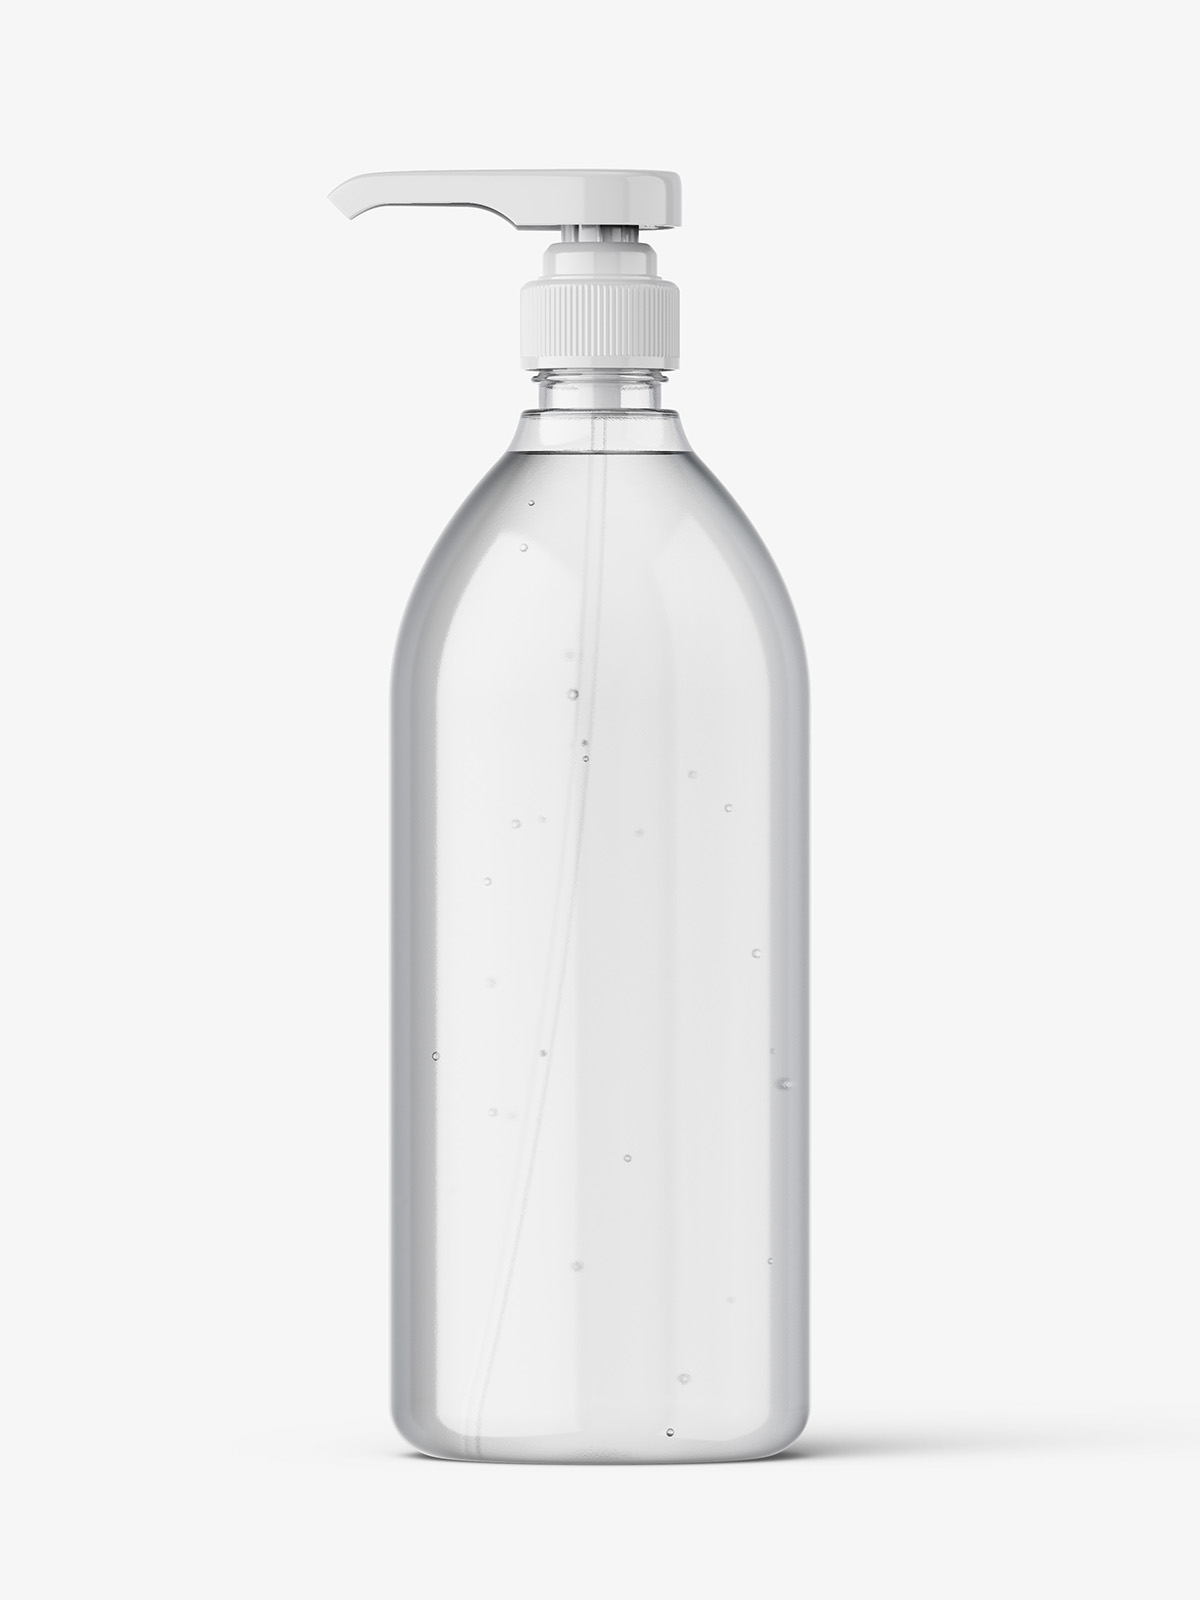 Clear bottle with pump mockup - Smarty Mockups